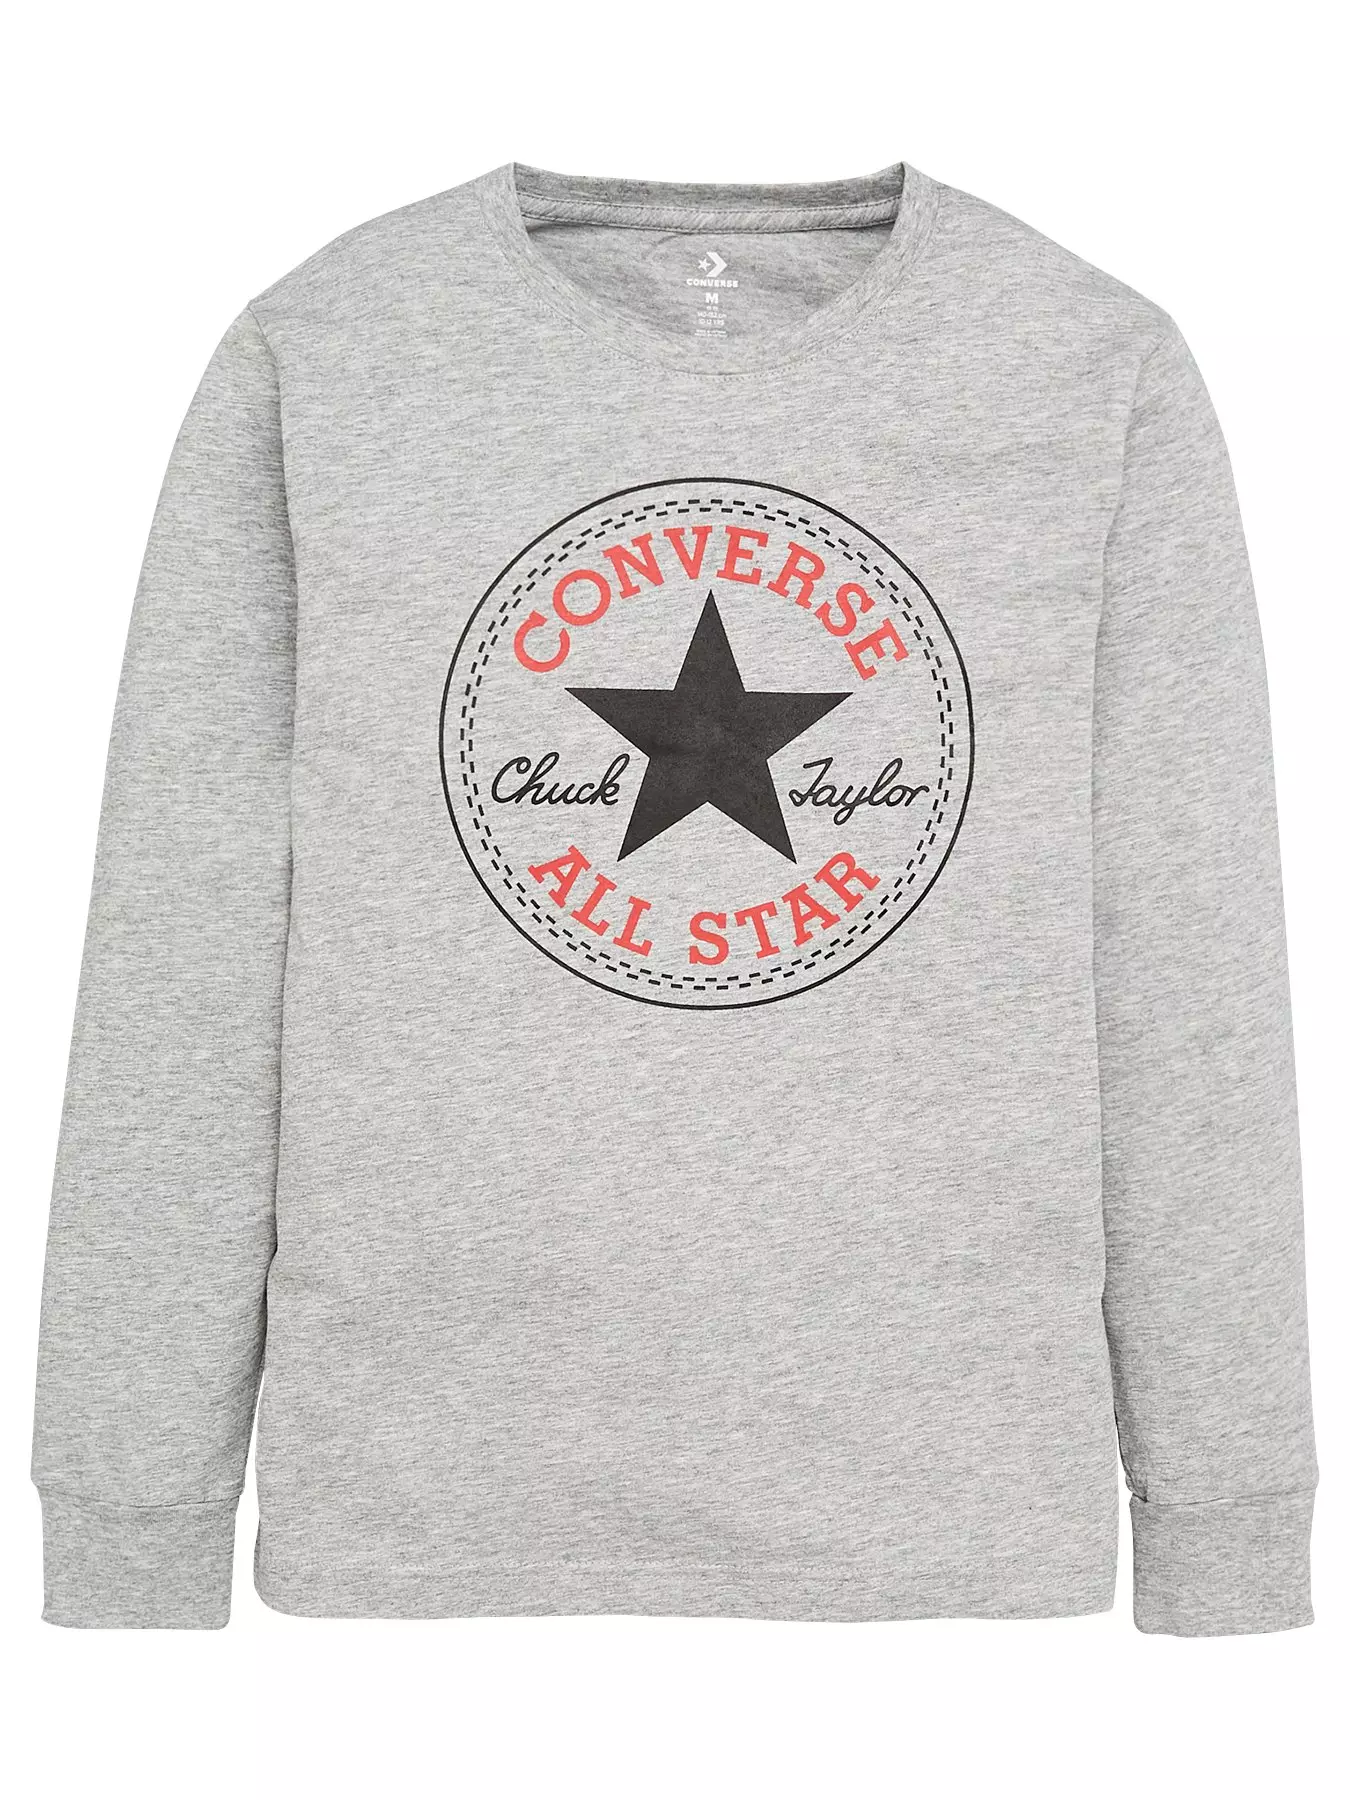 Converse Boys clothes | Child & baby | www.very.co.uk